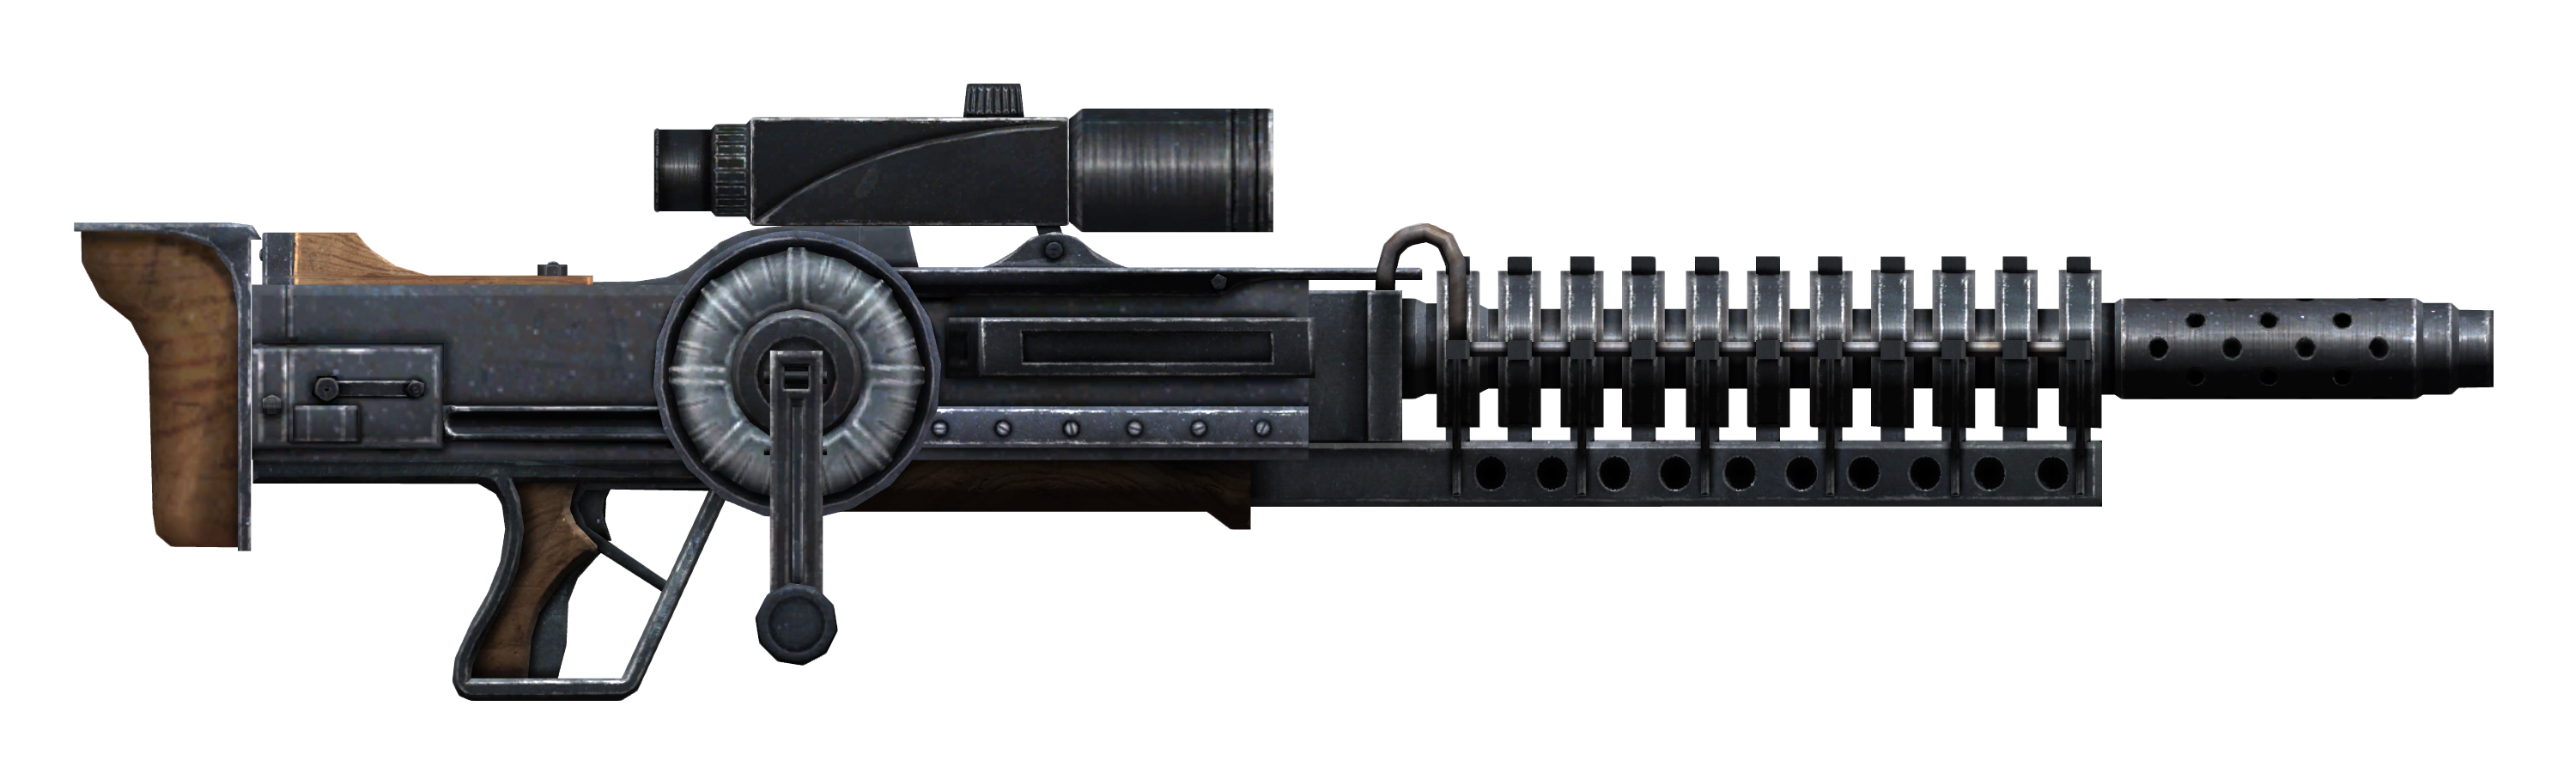 Lahti L39 Old Gauss Rifle Current Prototype Gauss Rifle Fallout 4 Mod Requests The Nexus Forums